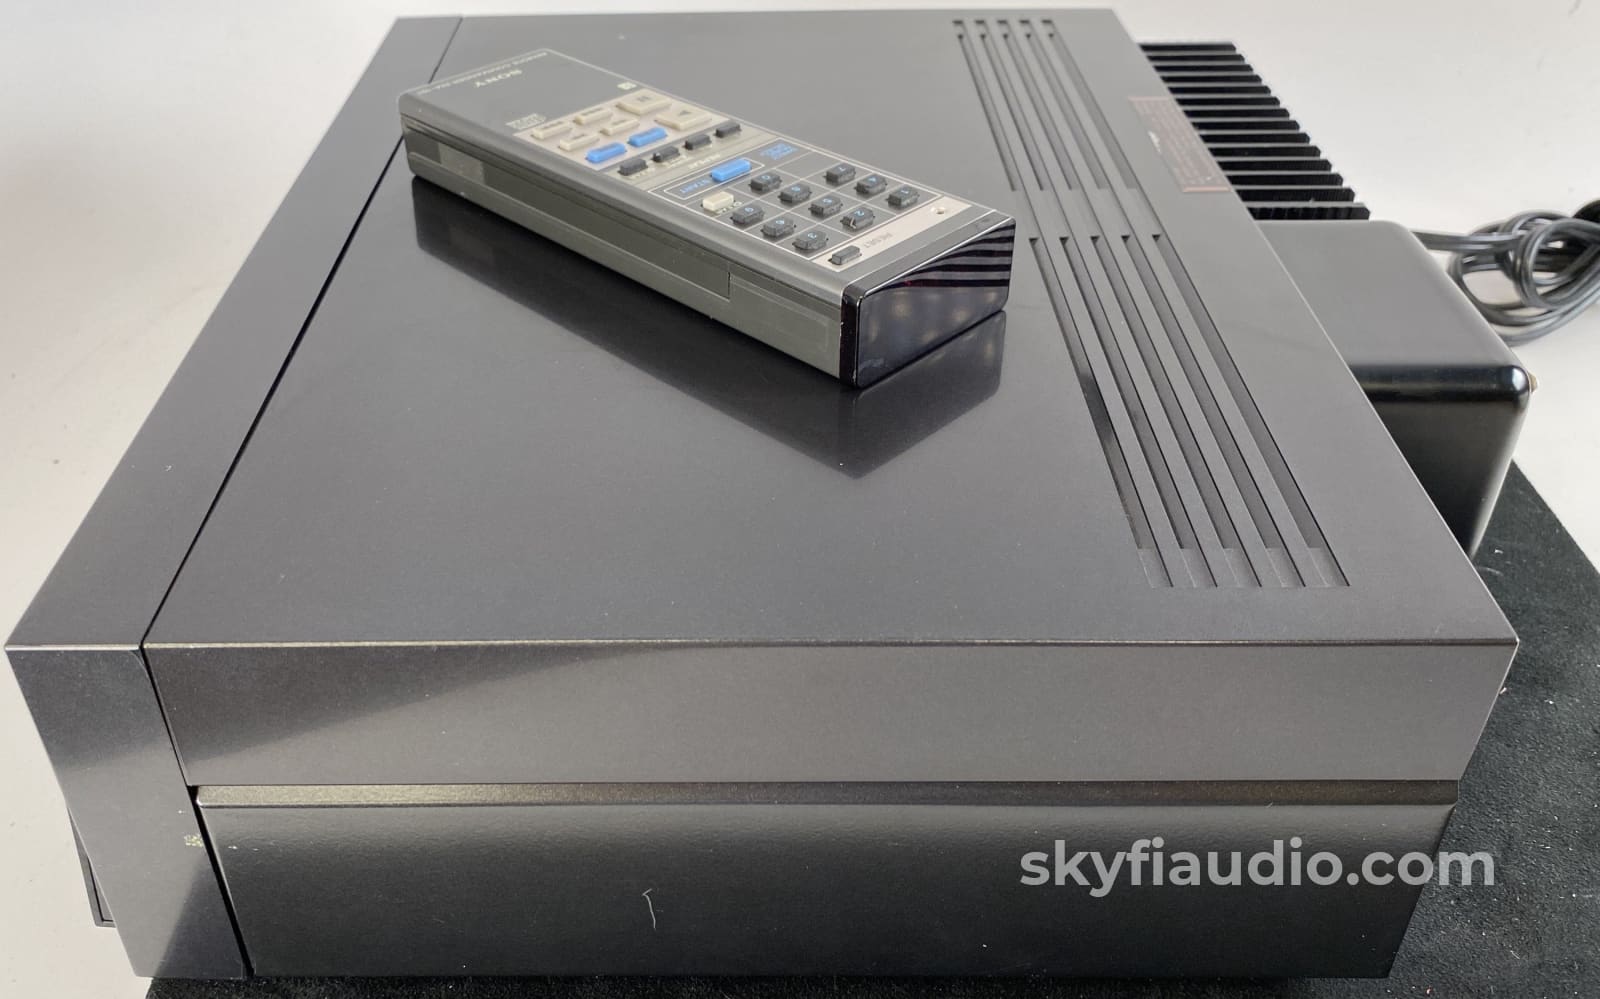 Sony Cdp-101 Worlds First Cd Player - A Piece Of Audio History And Working Perfectly + Digital